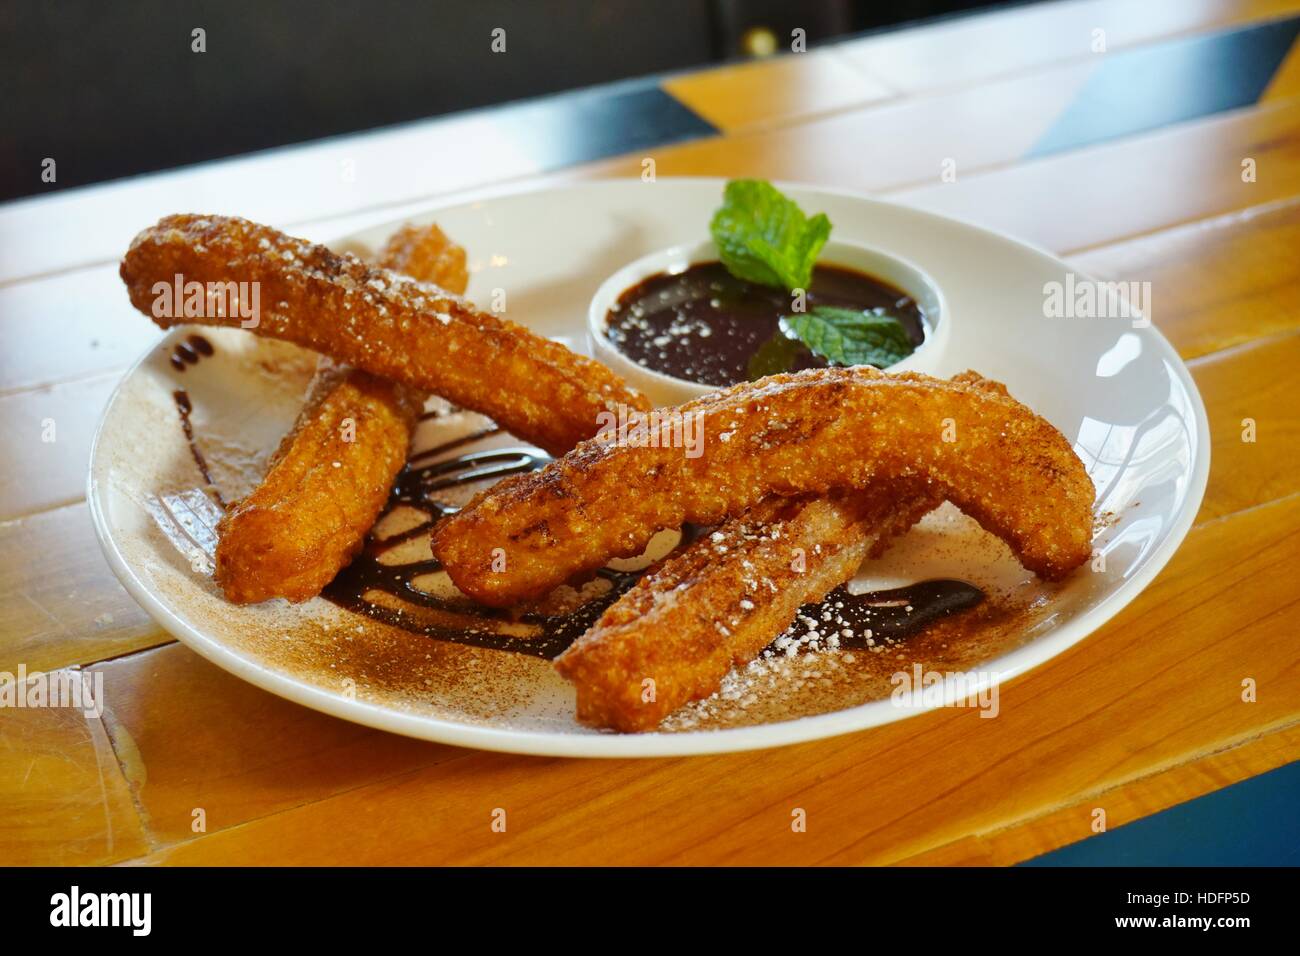 Plate of fried churro fritters with sugar and chocolate dipping sauce Stock Photo